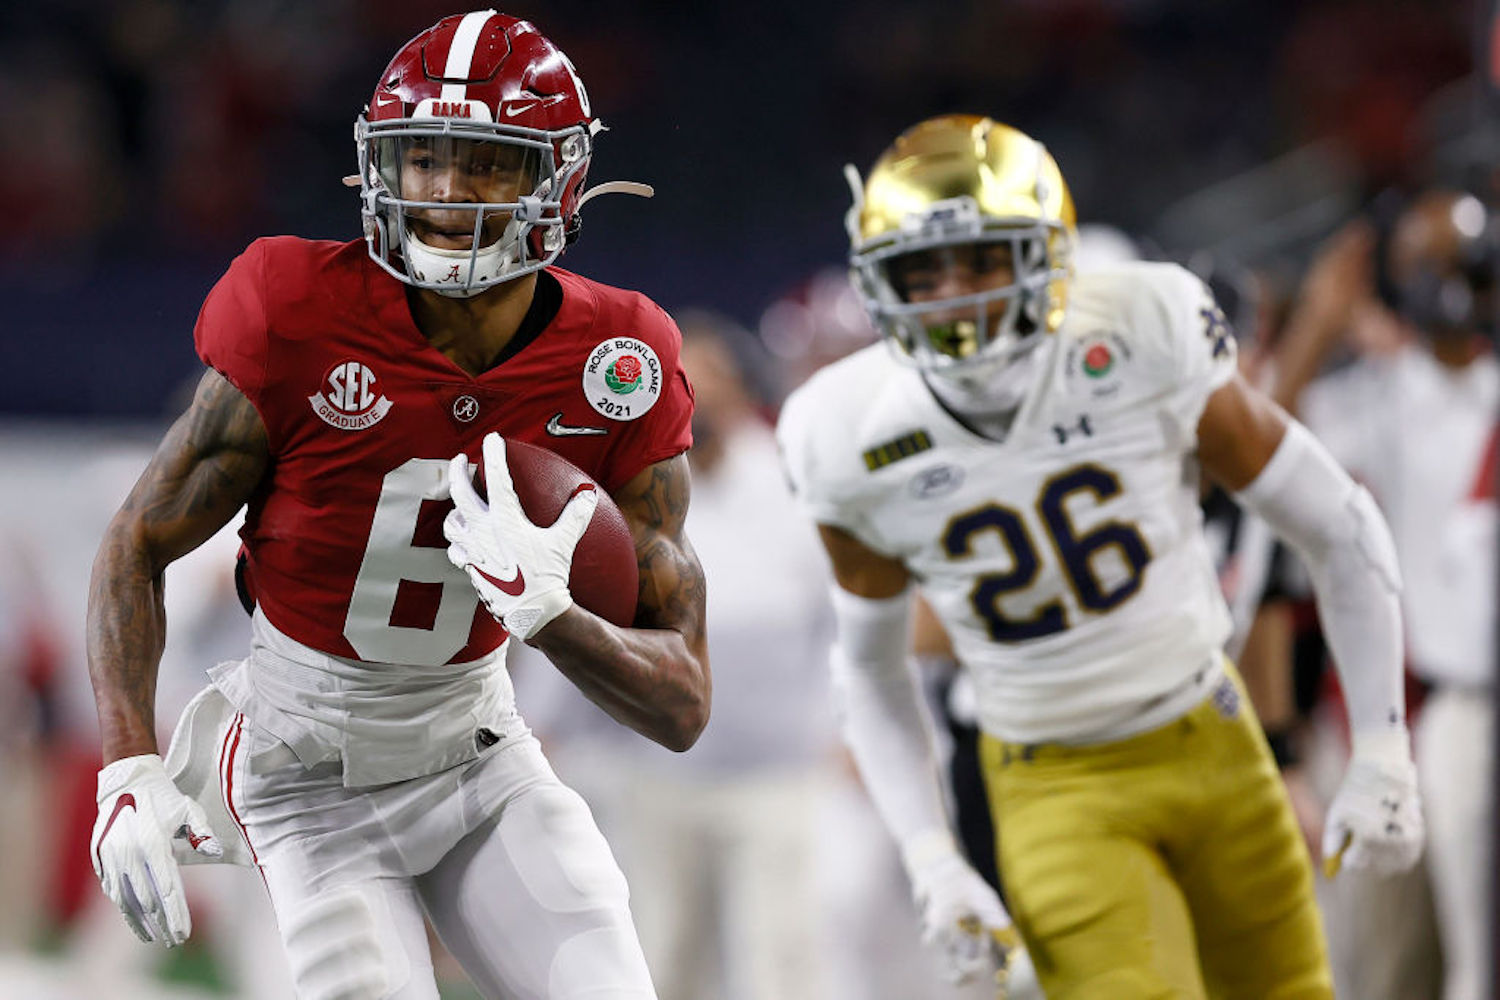 Alabama's Devonta Smith is the favorite to win the 2020 Heisman Trophy. Who was the last wide receiver to win the award and when was it?